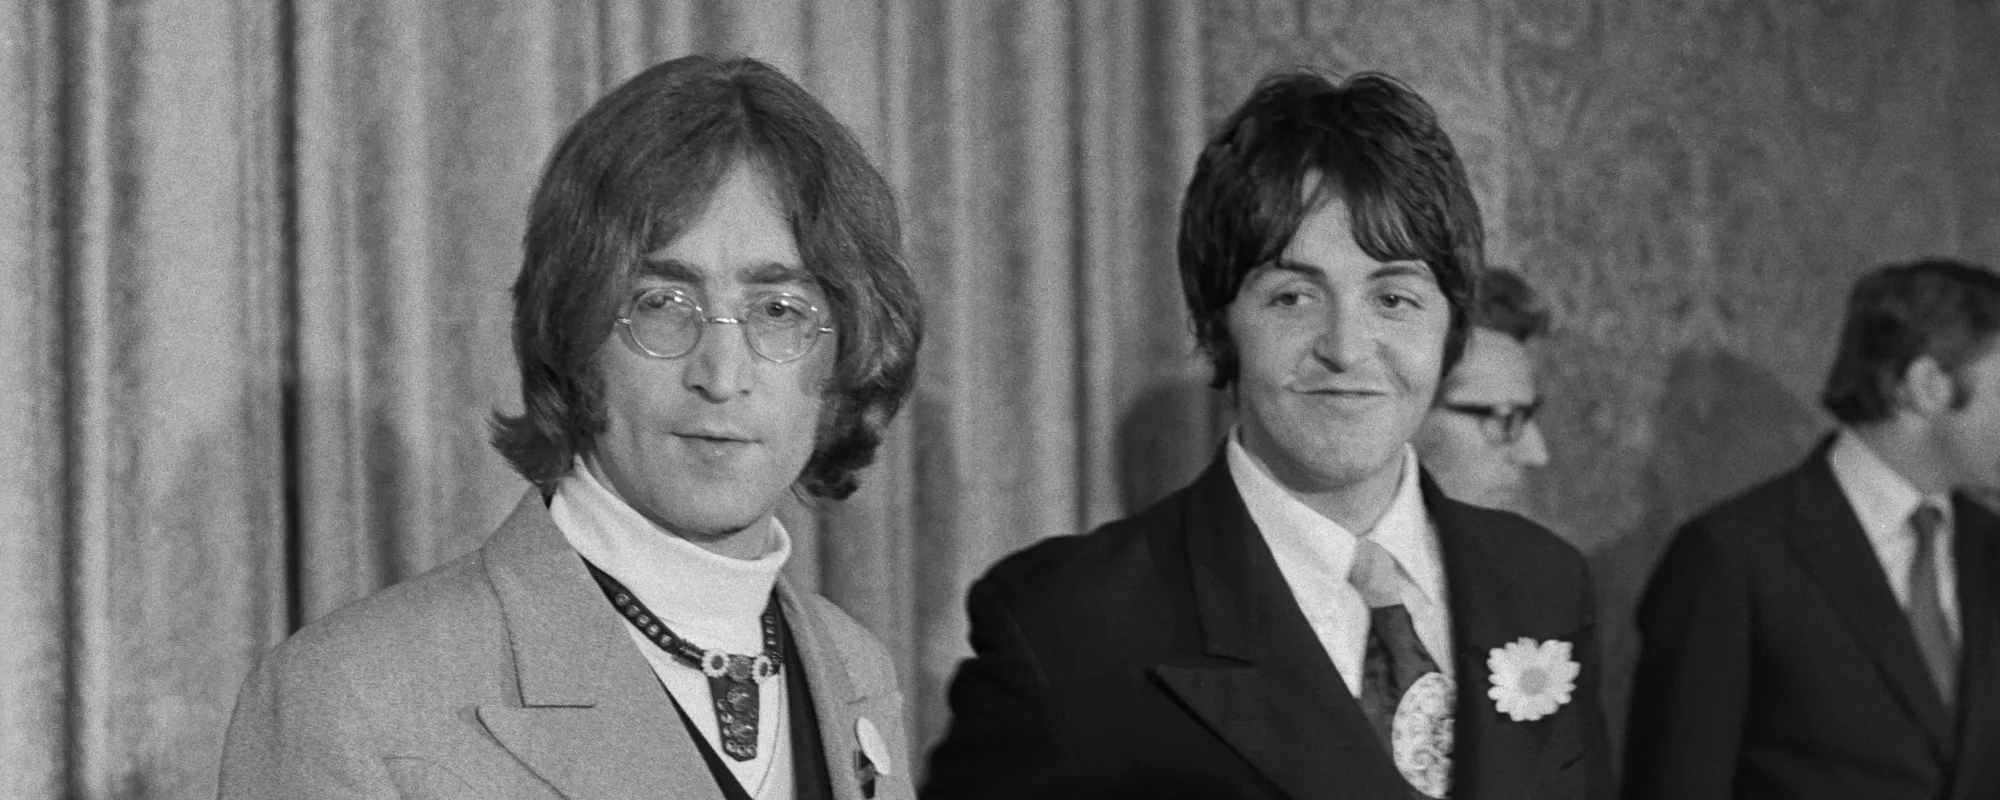 We Asked AI to Write a Duet In the Style of Paul McCartney and John Lennon – See the Results